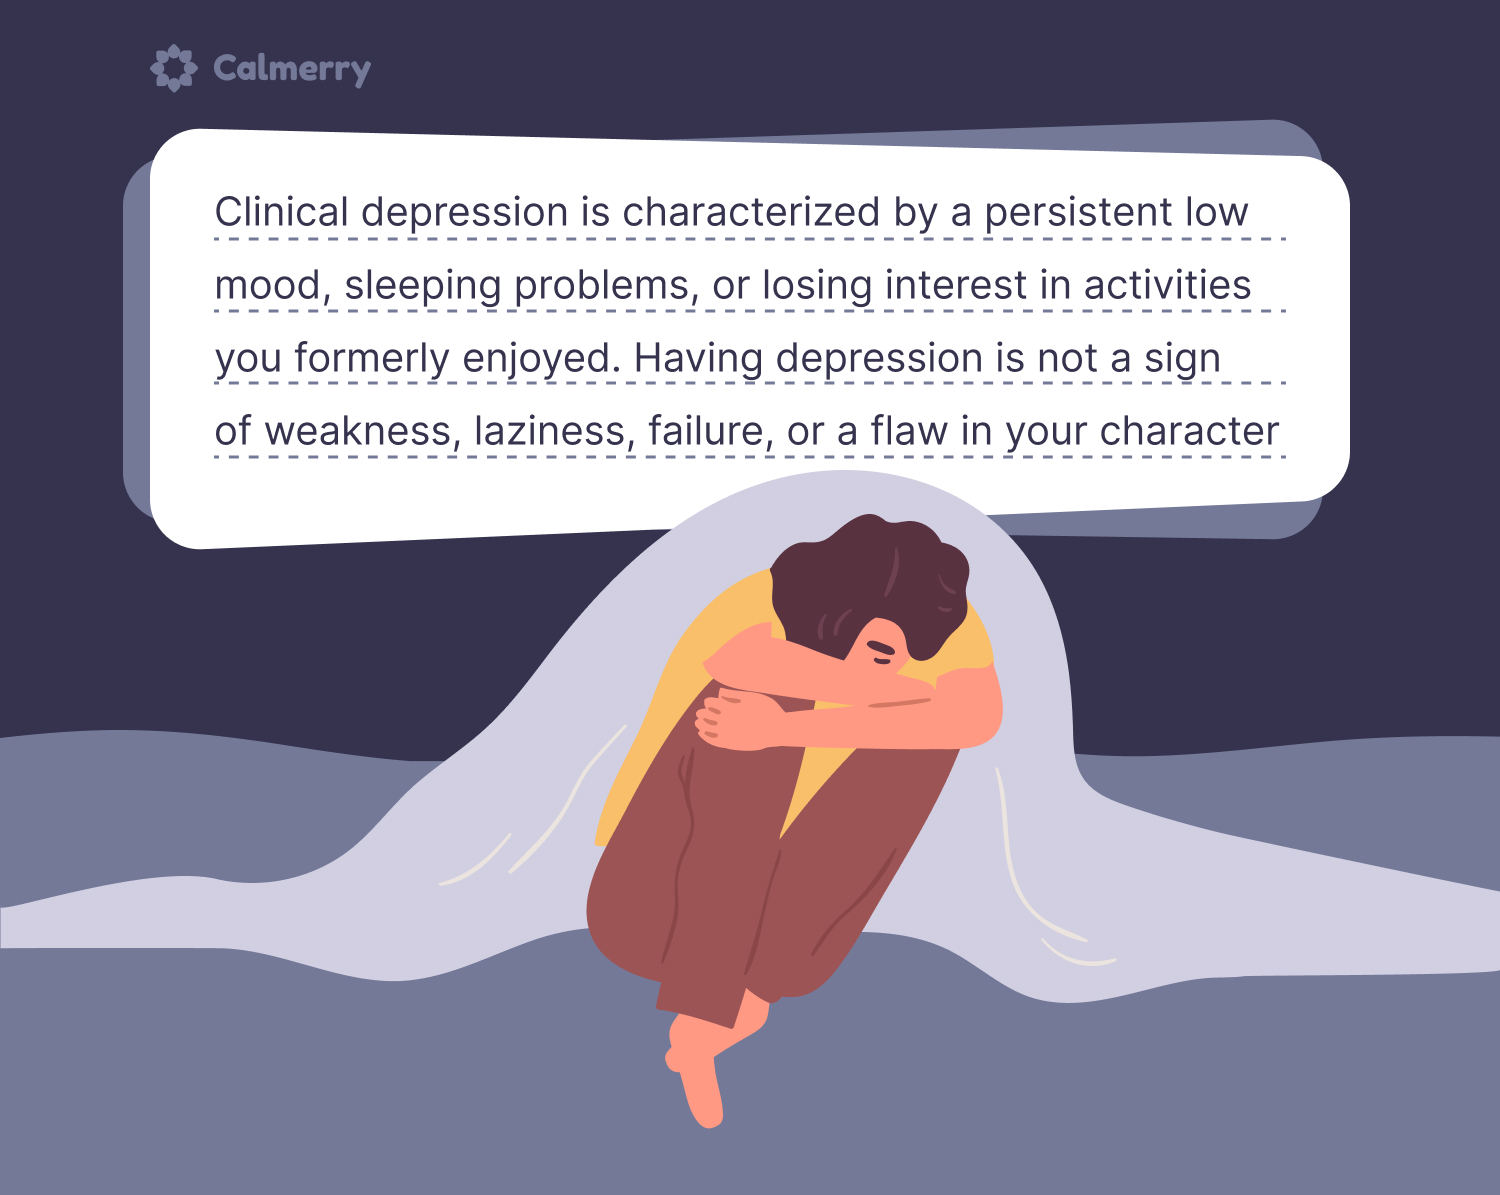 Clinical depression is defined as a severe form of depression that requires diagnosis and treatment